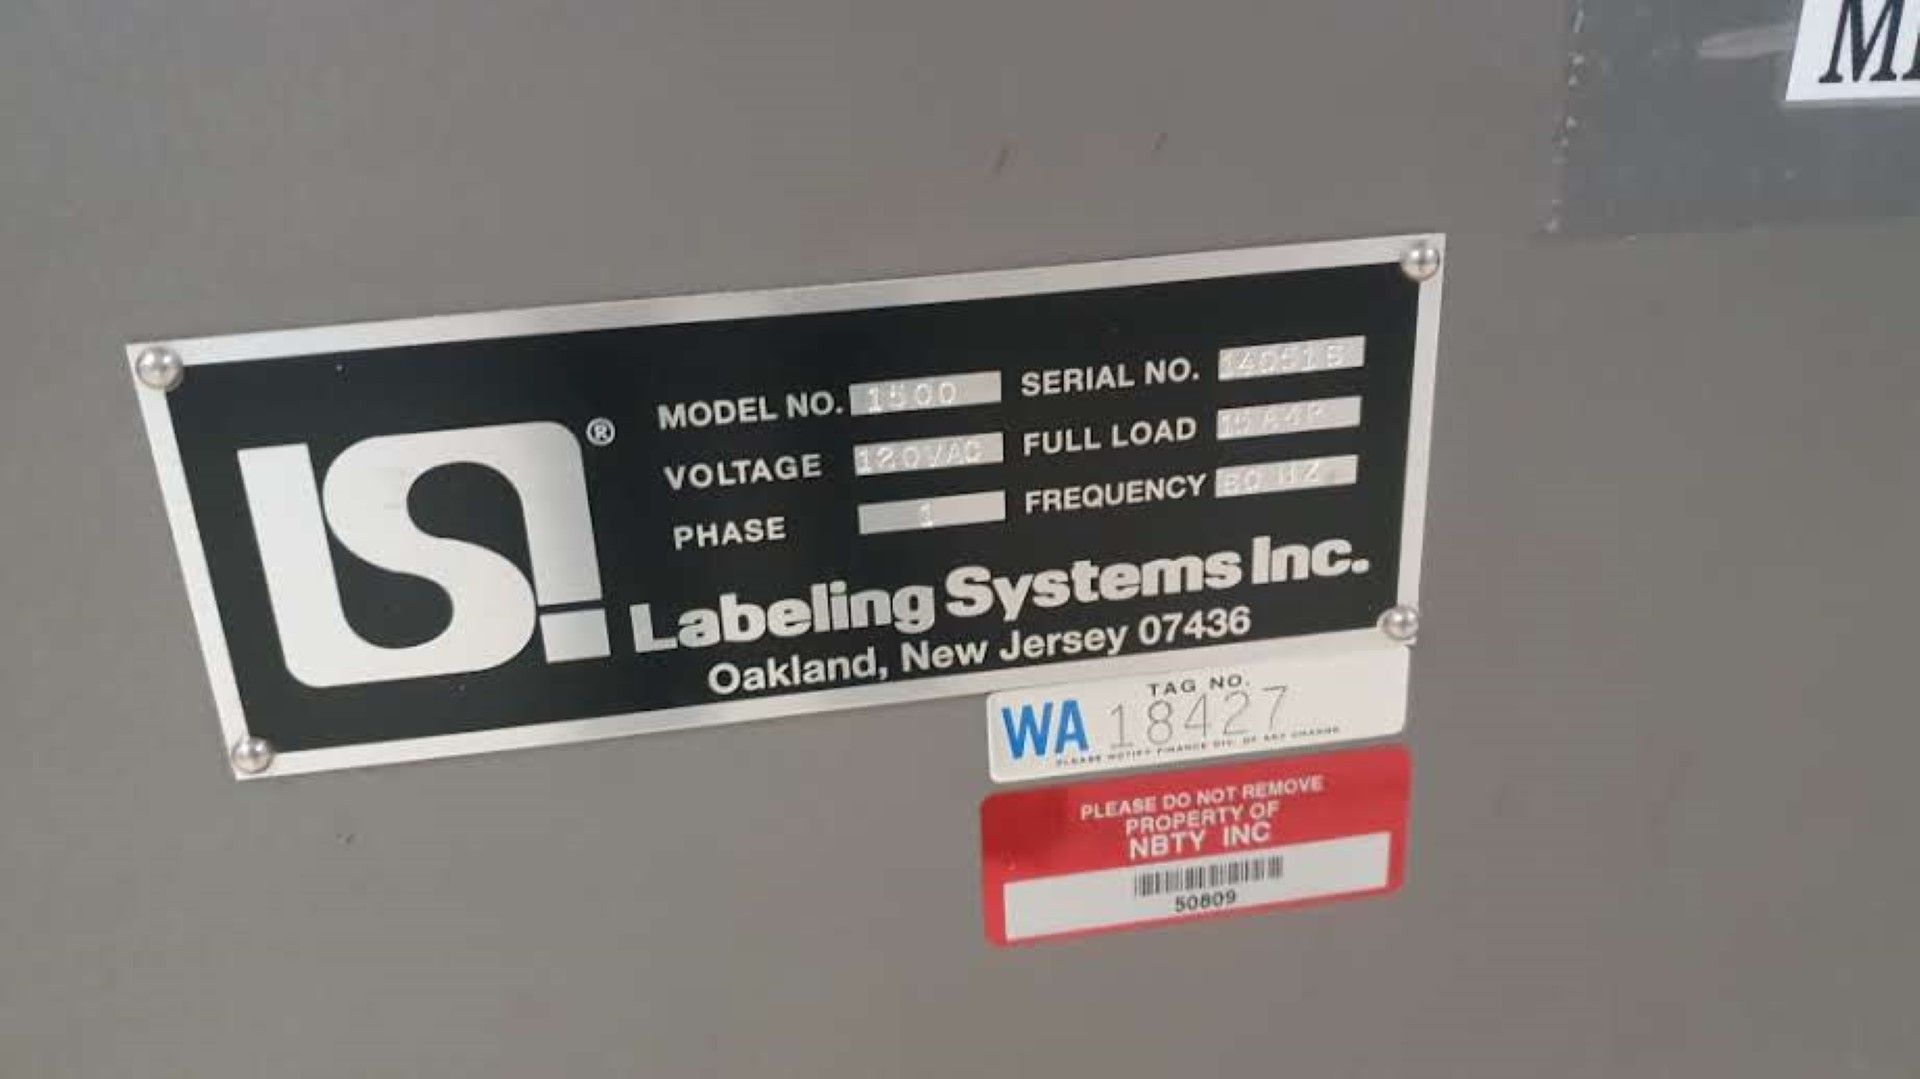 LSI Pressure Sensitive Wraparound Labeler. Model 1500. 120V, 60Hz, 1Ph, 15A. As shown in photos. - Image 3 of 5